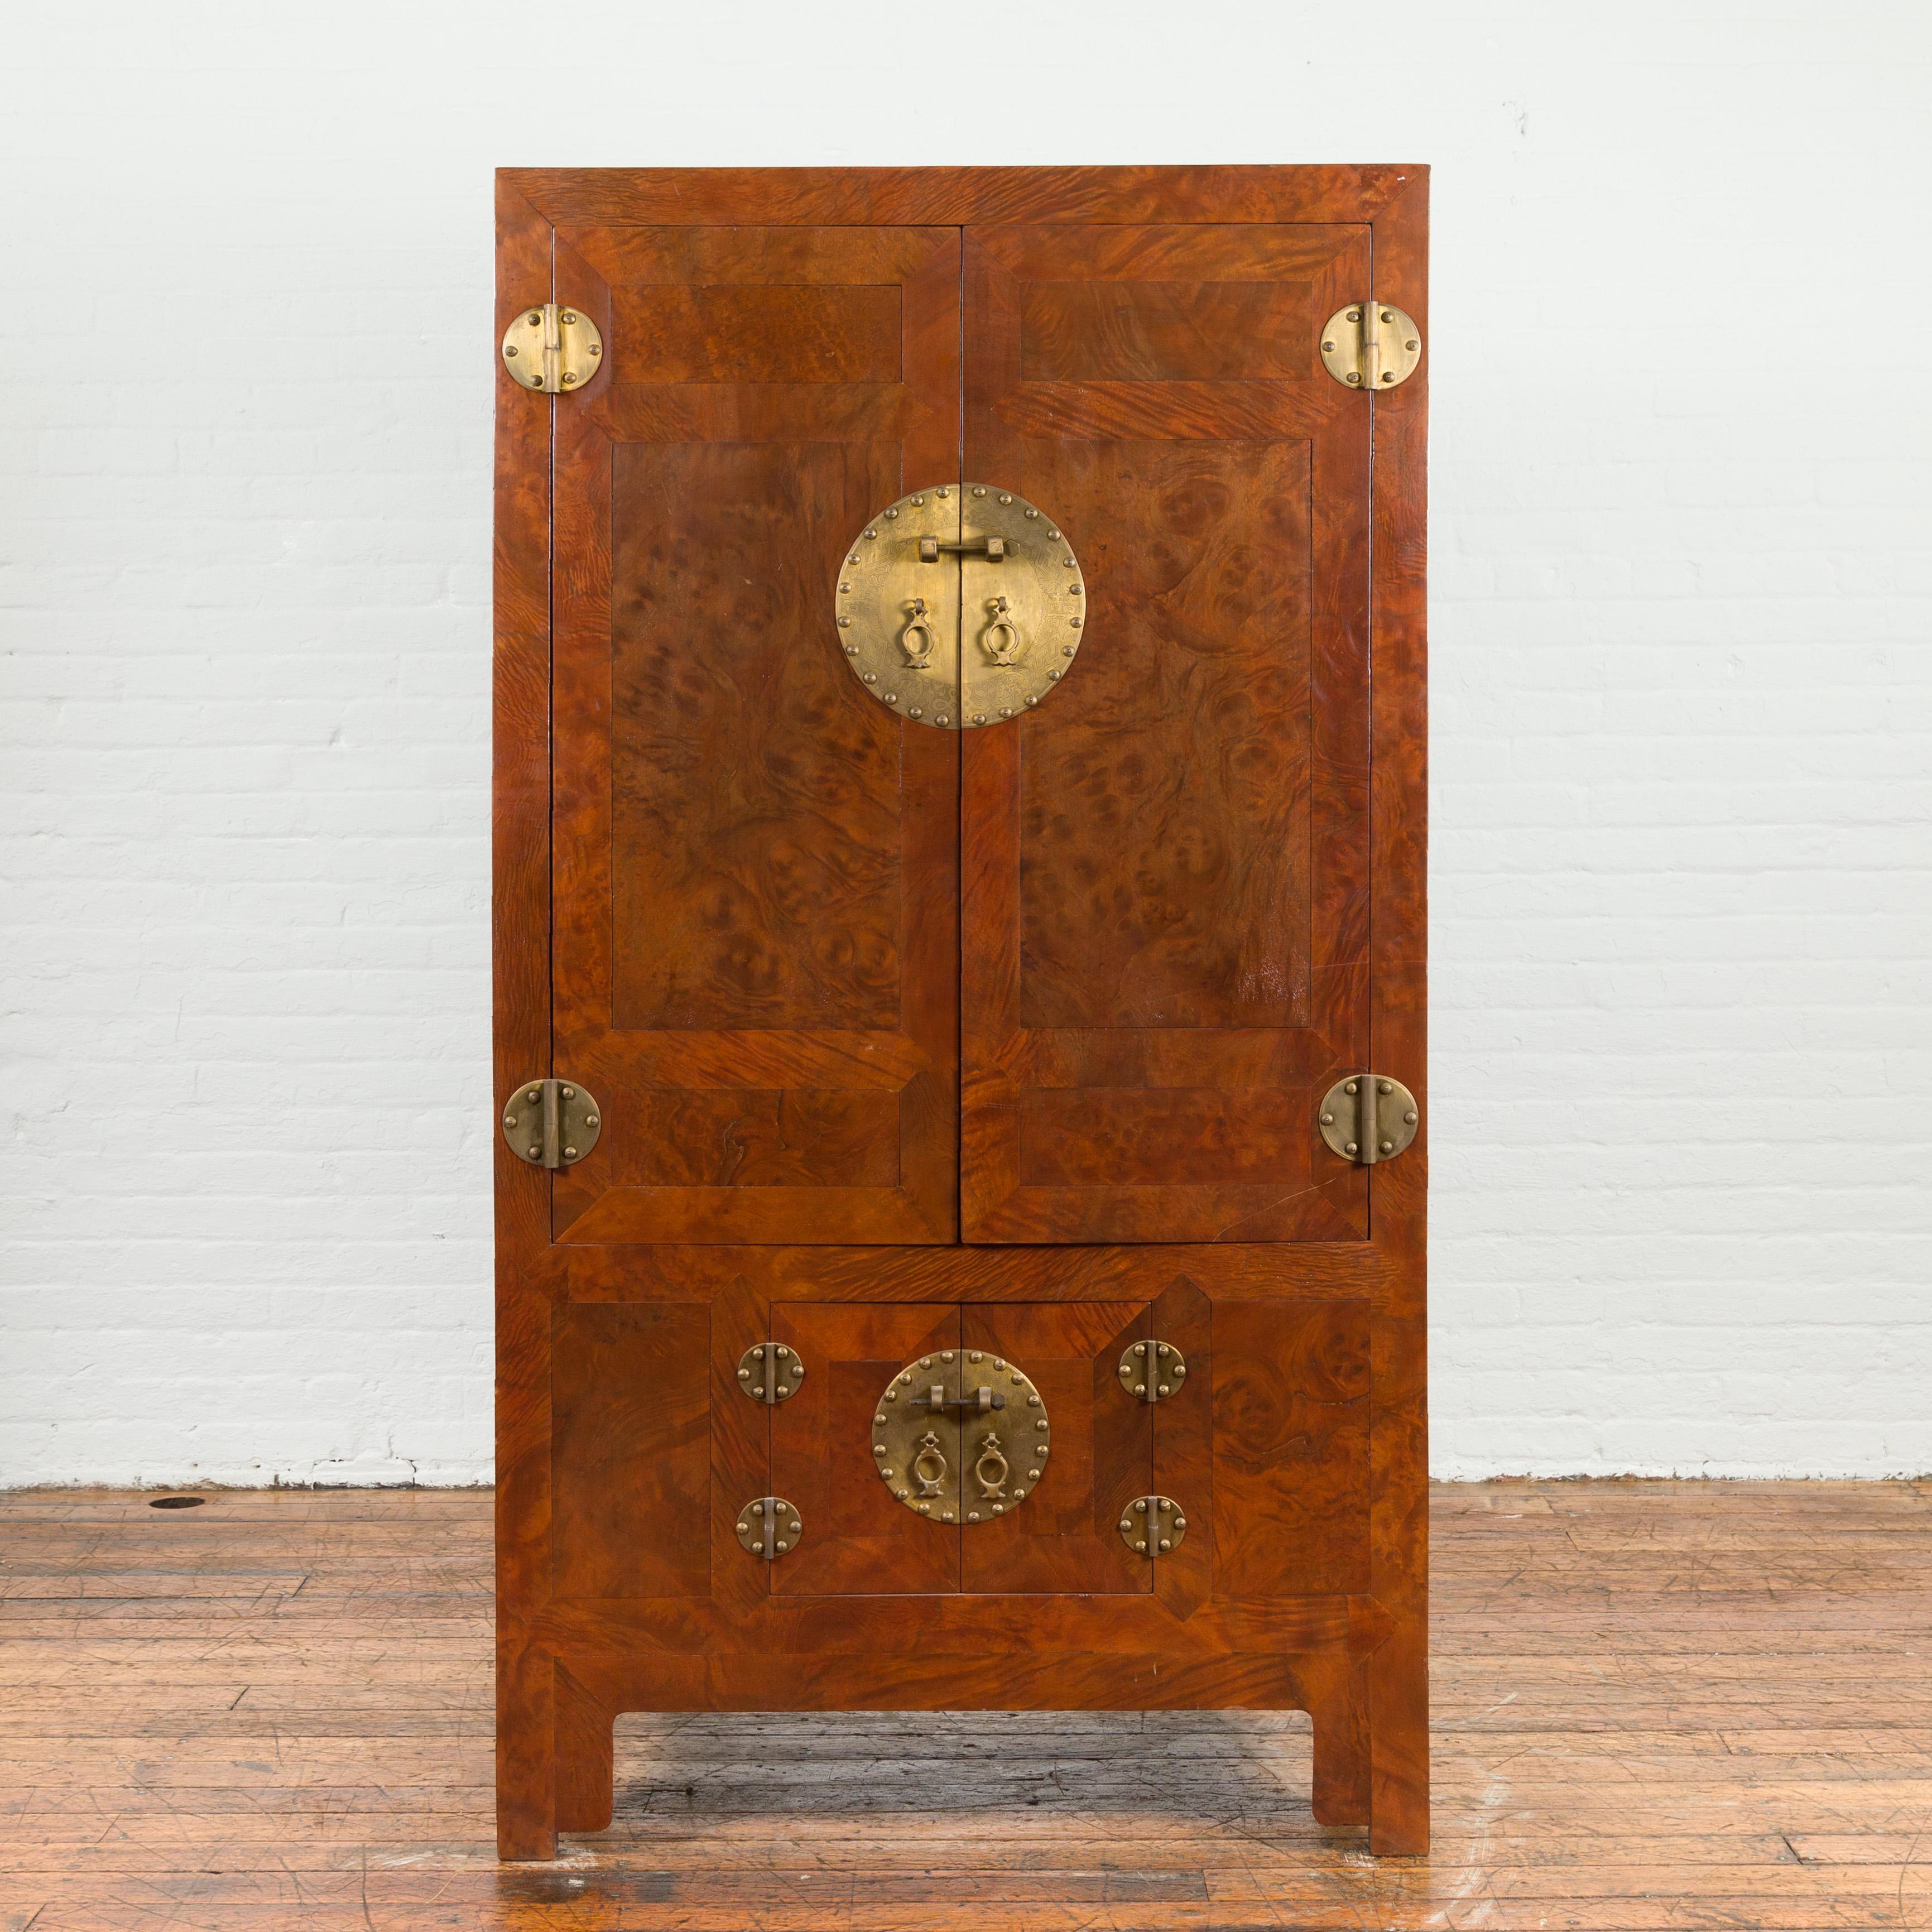 A Chinese early 20th century antique burl wood cabinet from Hebei, with medallion brass hardware. Created in the Northeastern province of Hebei during the early years of the 20th century, this cabinet features a linear silhouette perfectly